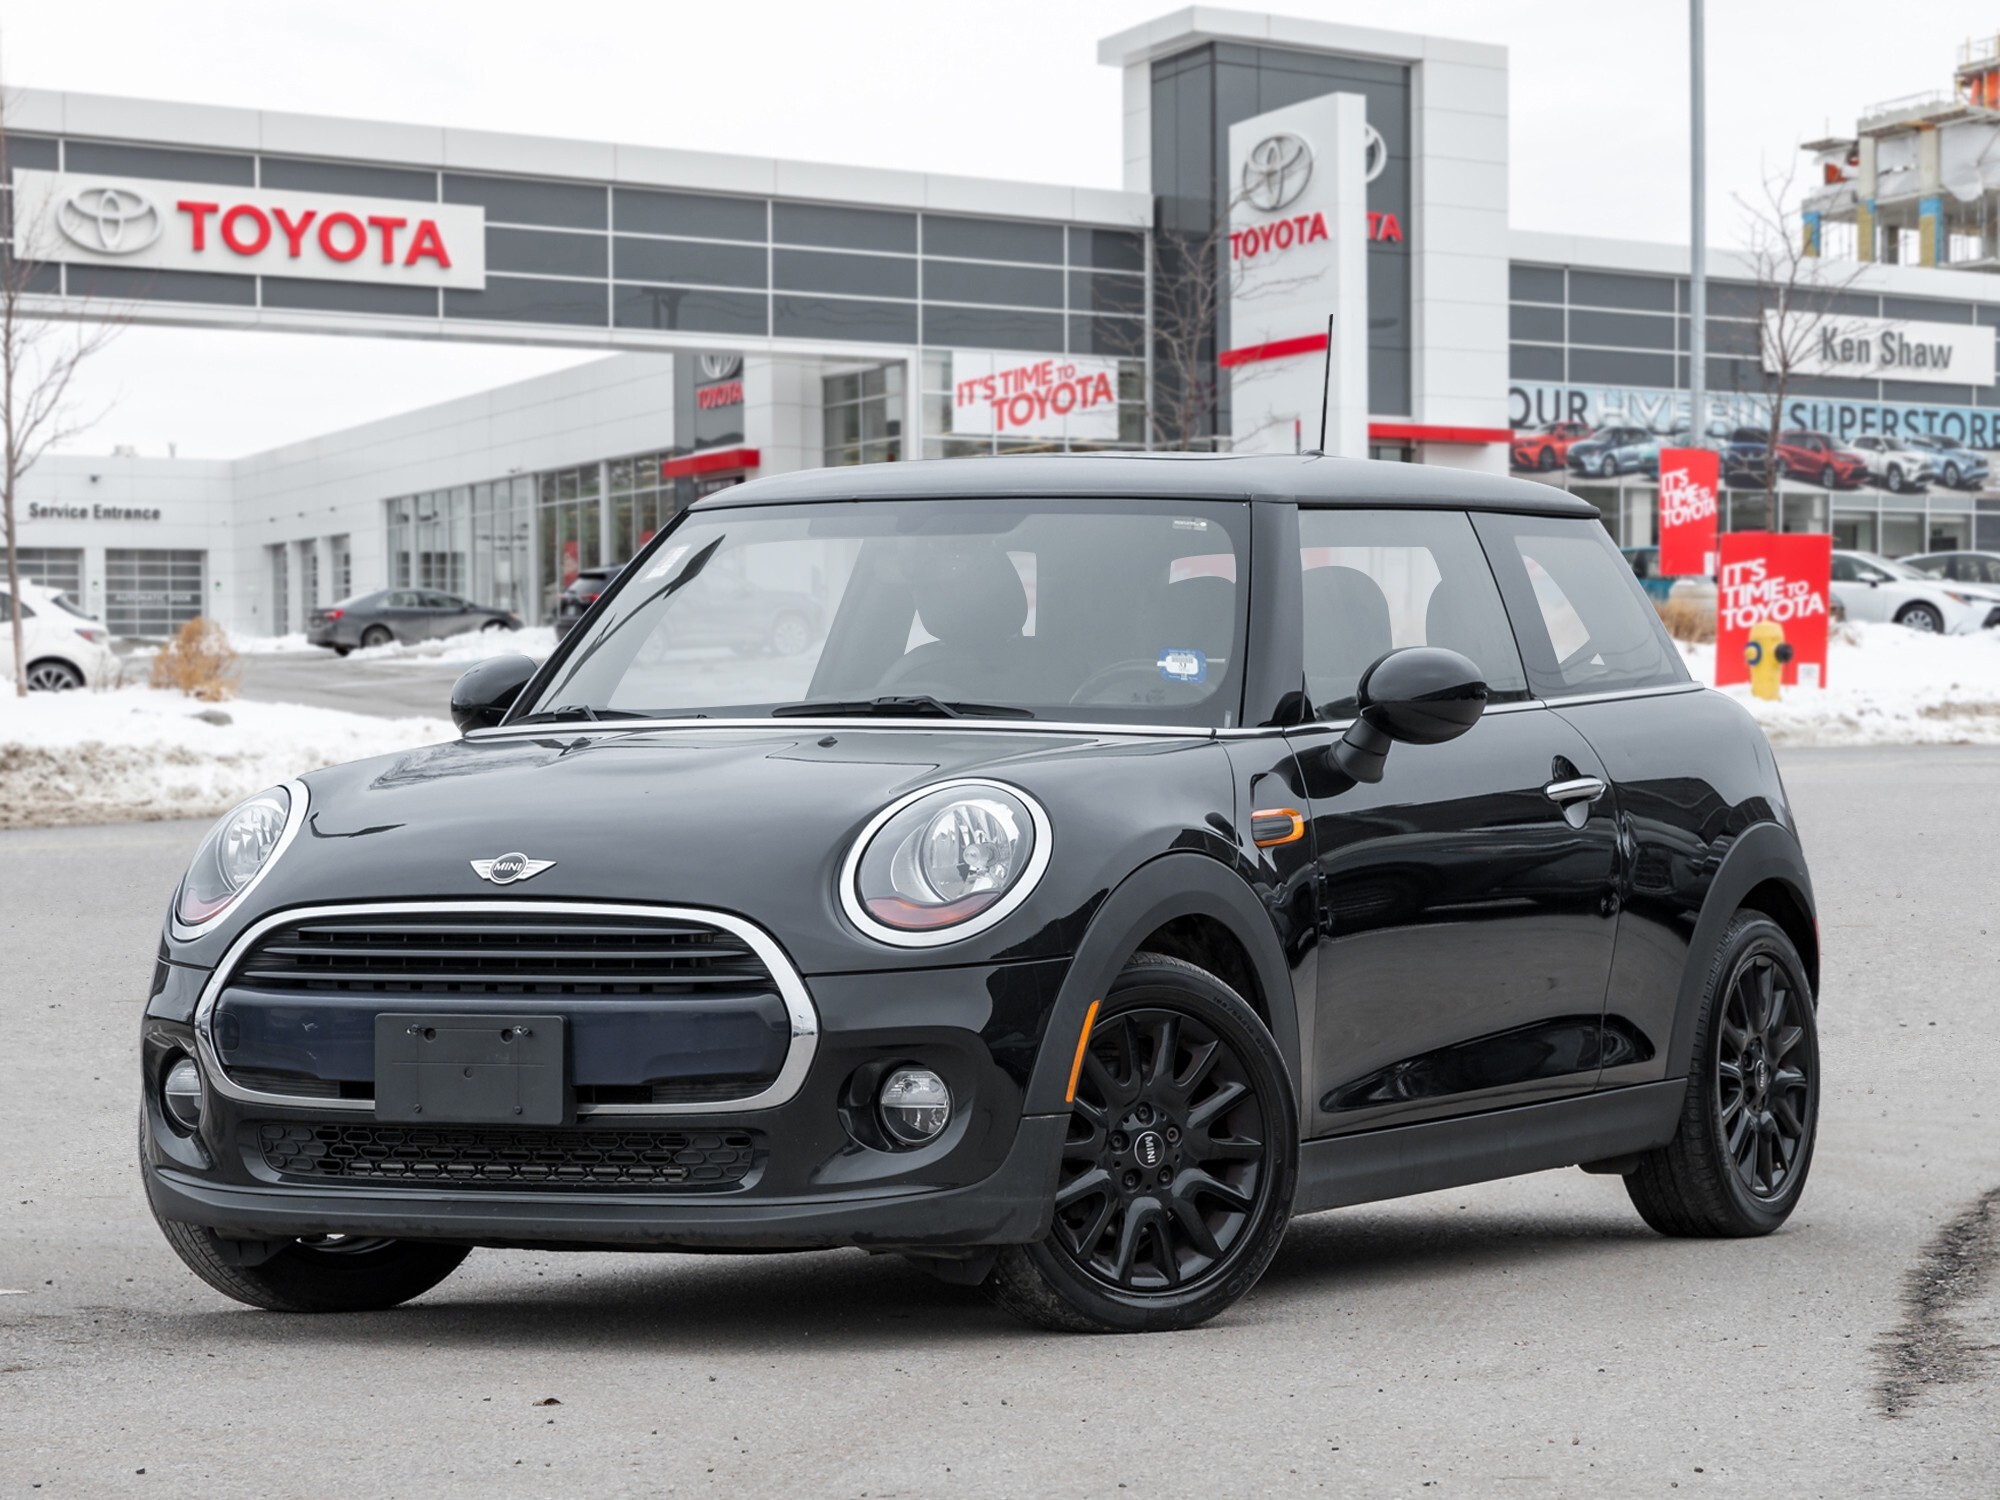 2017 MINI 3 Door All New Tires / Leather / Dual Sunroof